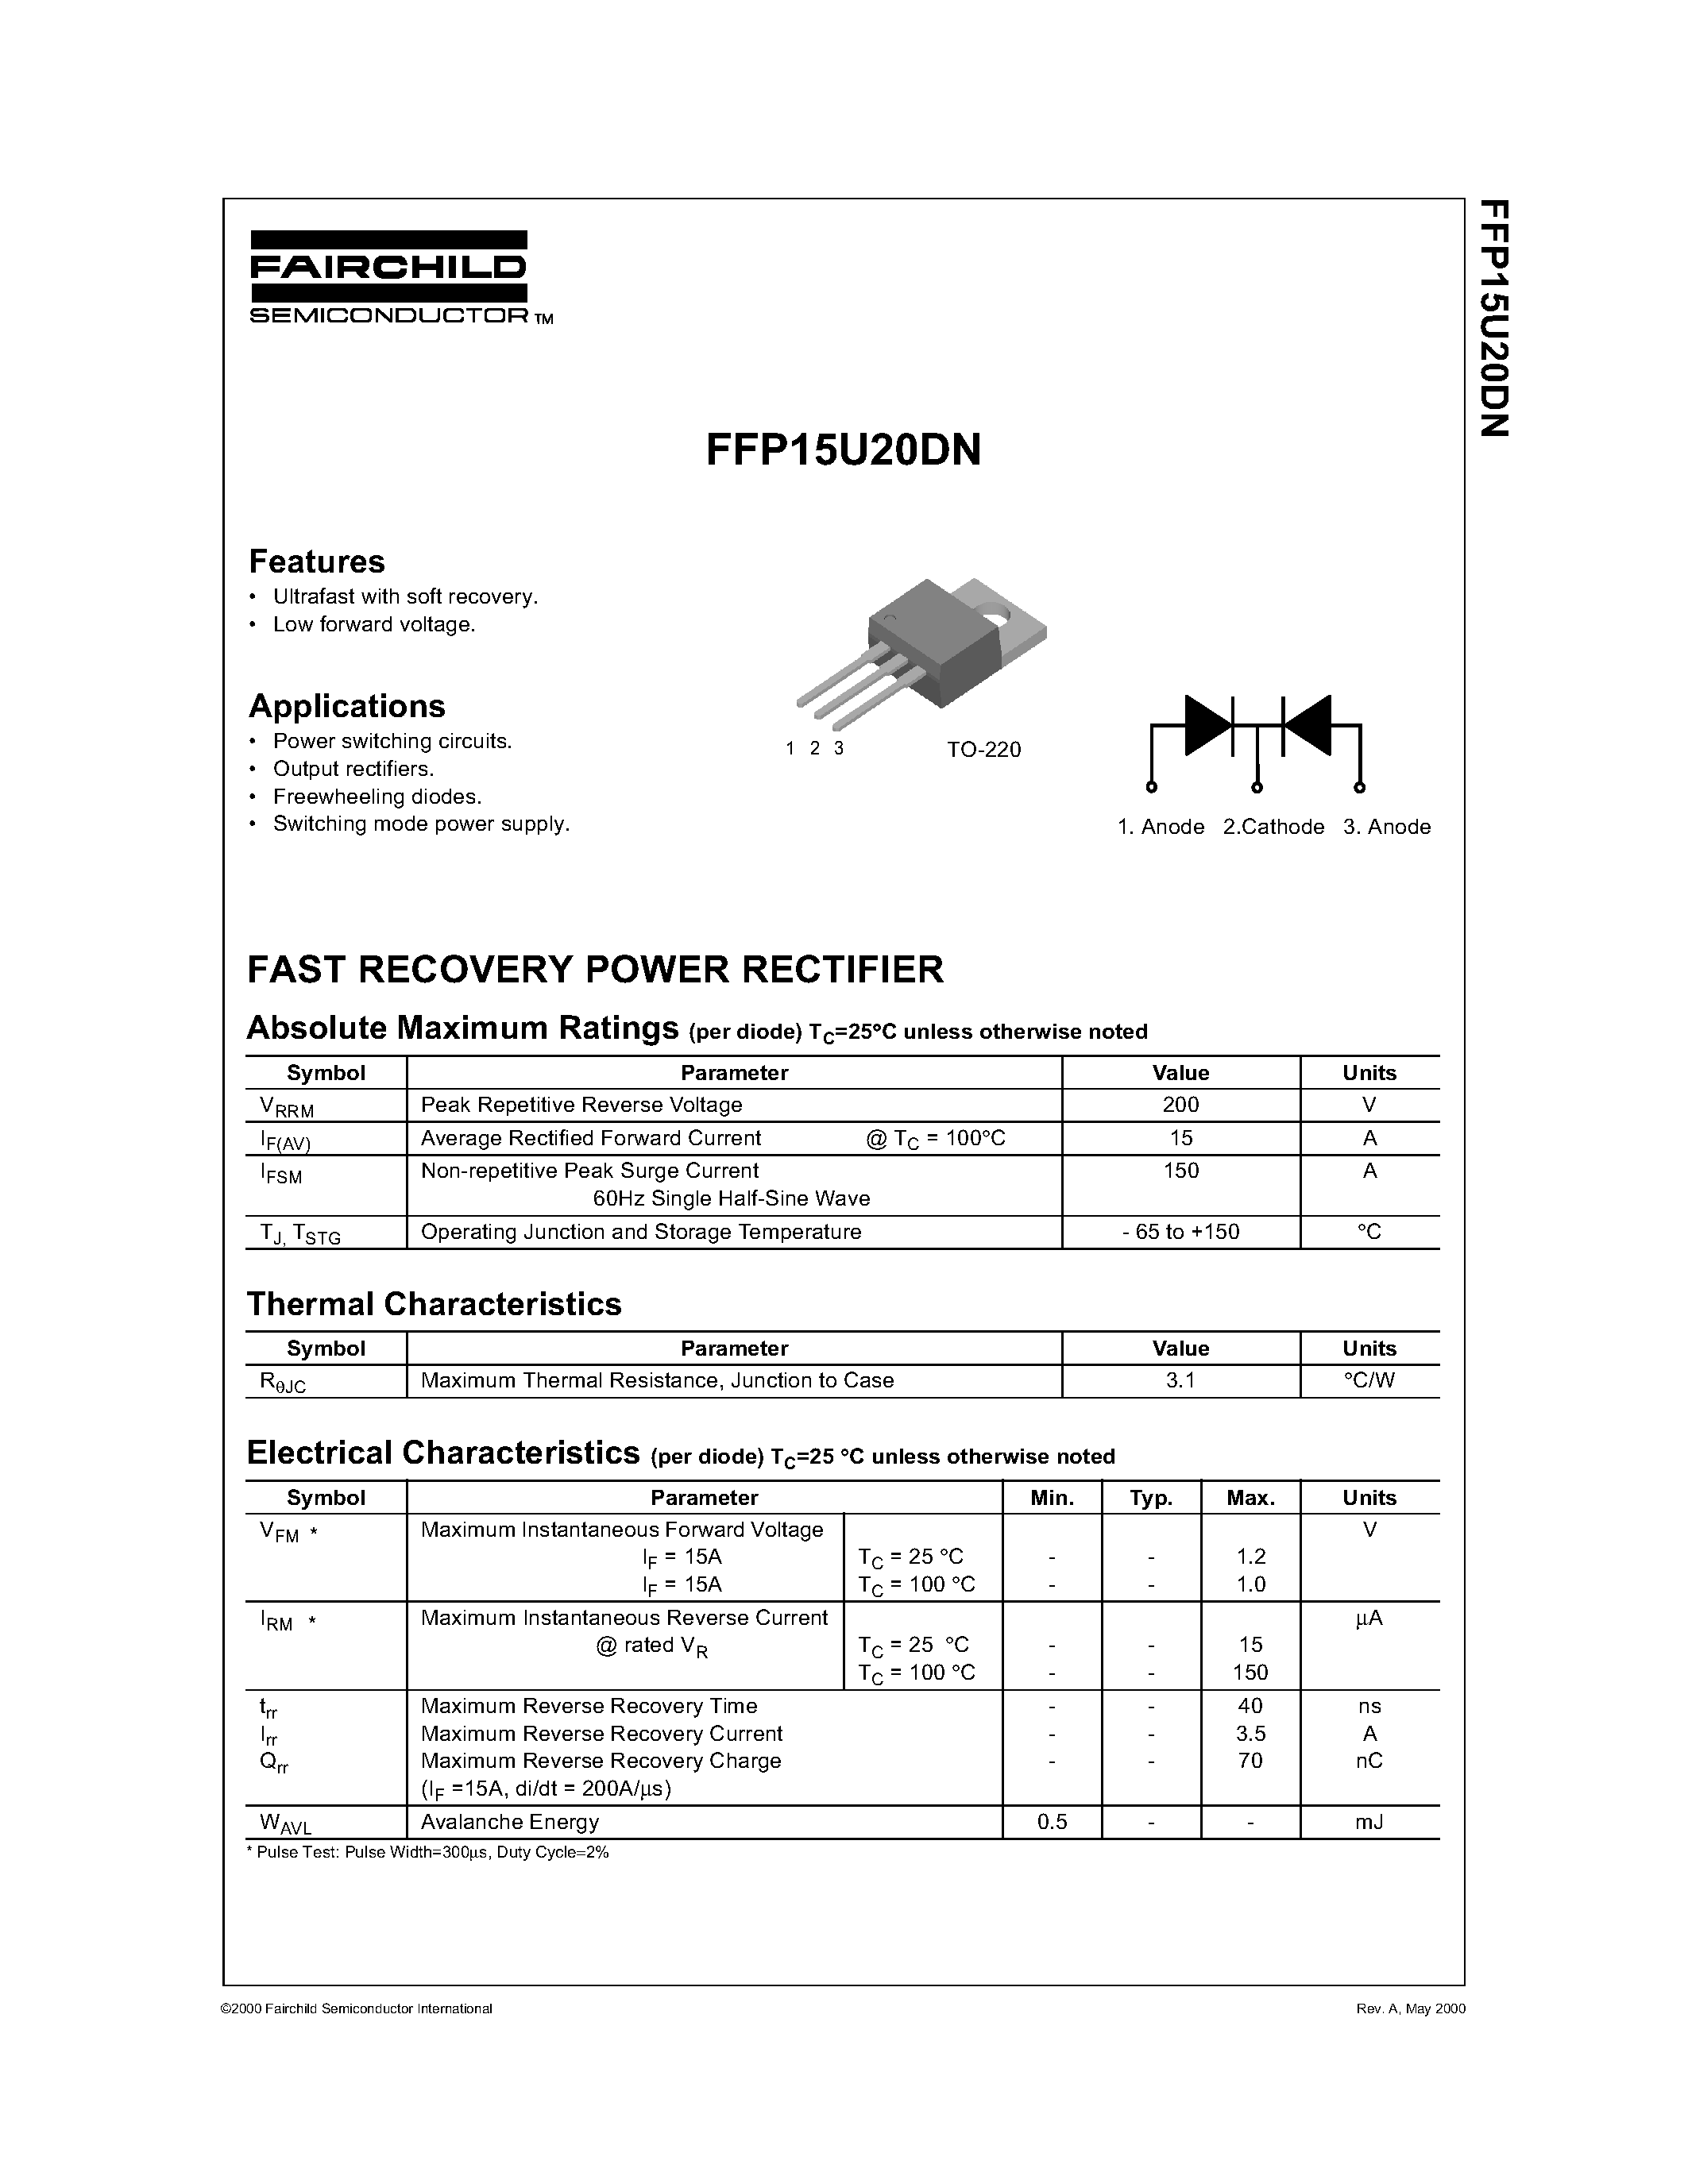 Даташит FFP15U20DN - FAST RECOVERY POWER RECTIFIER страница 1